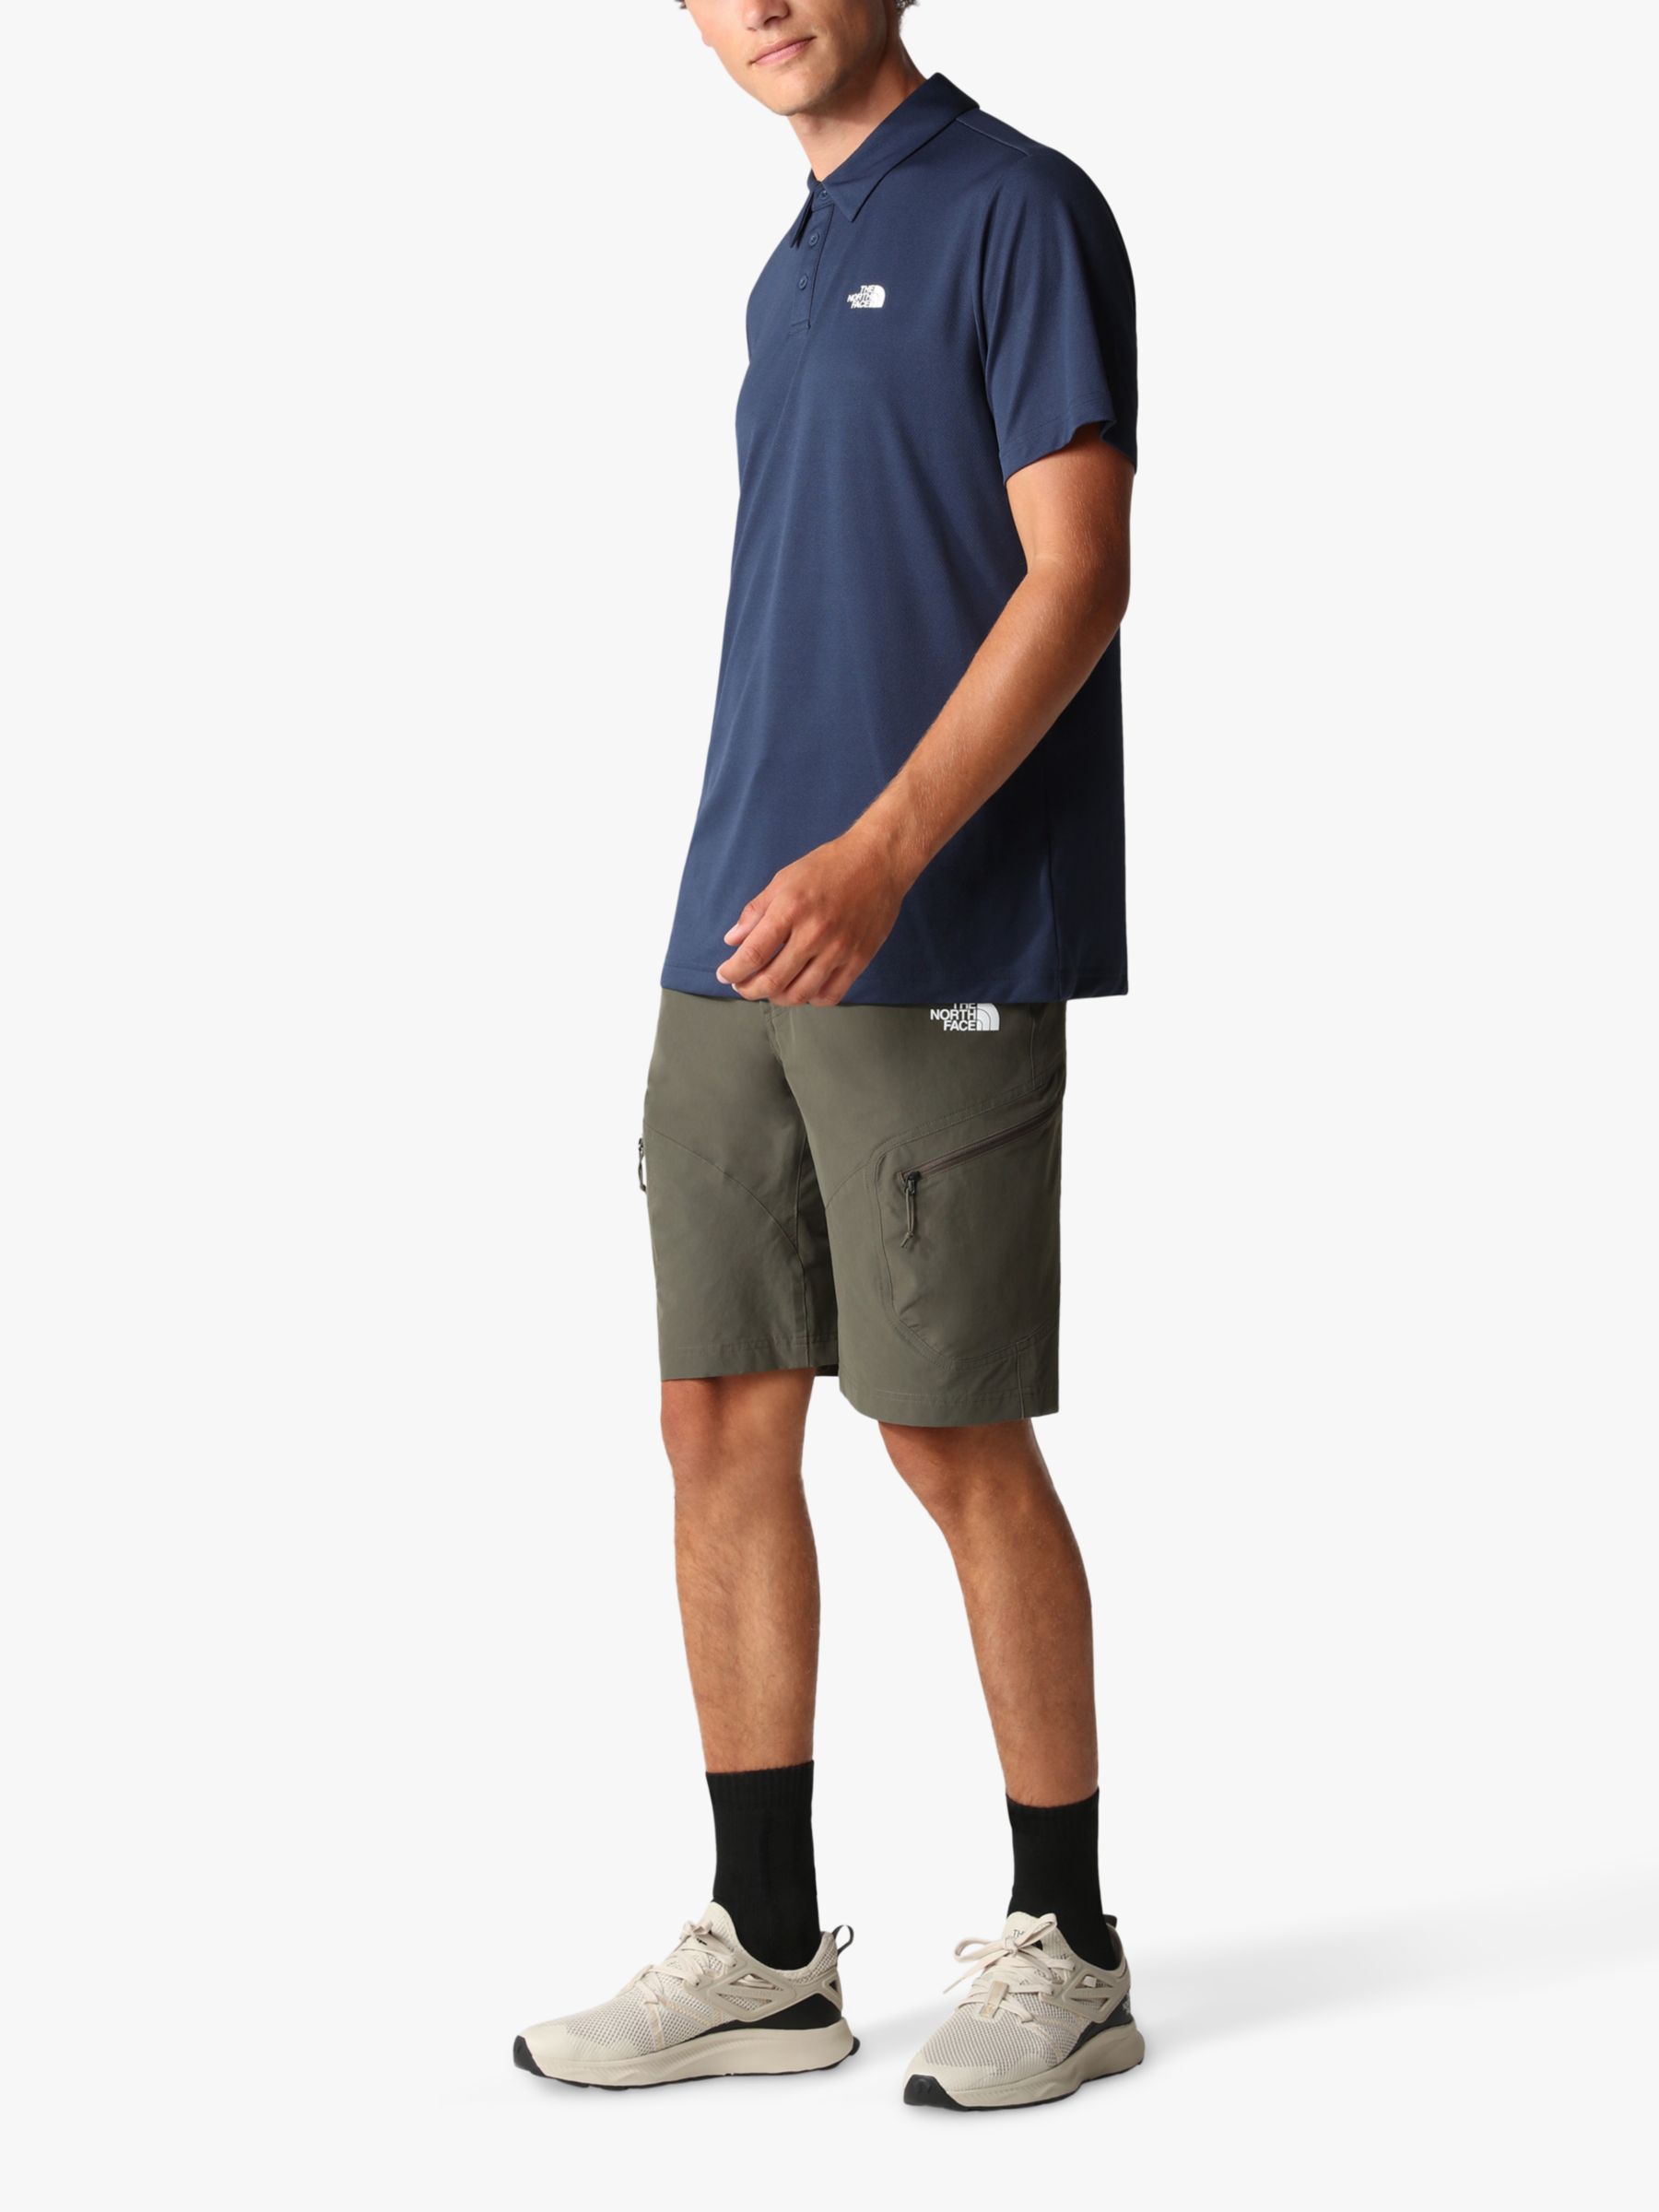 The North Face Tanken Polo Shirt, Summit Navy, M